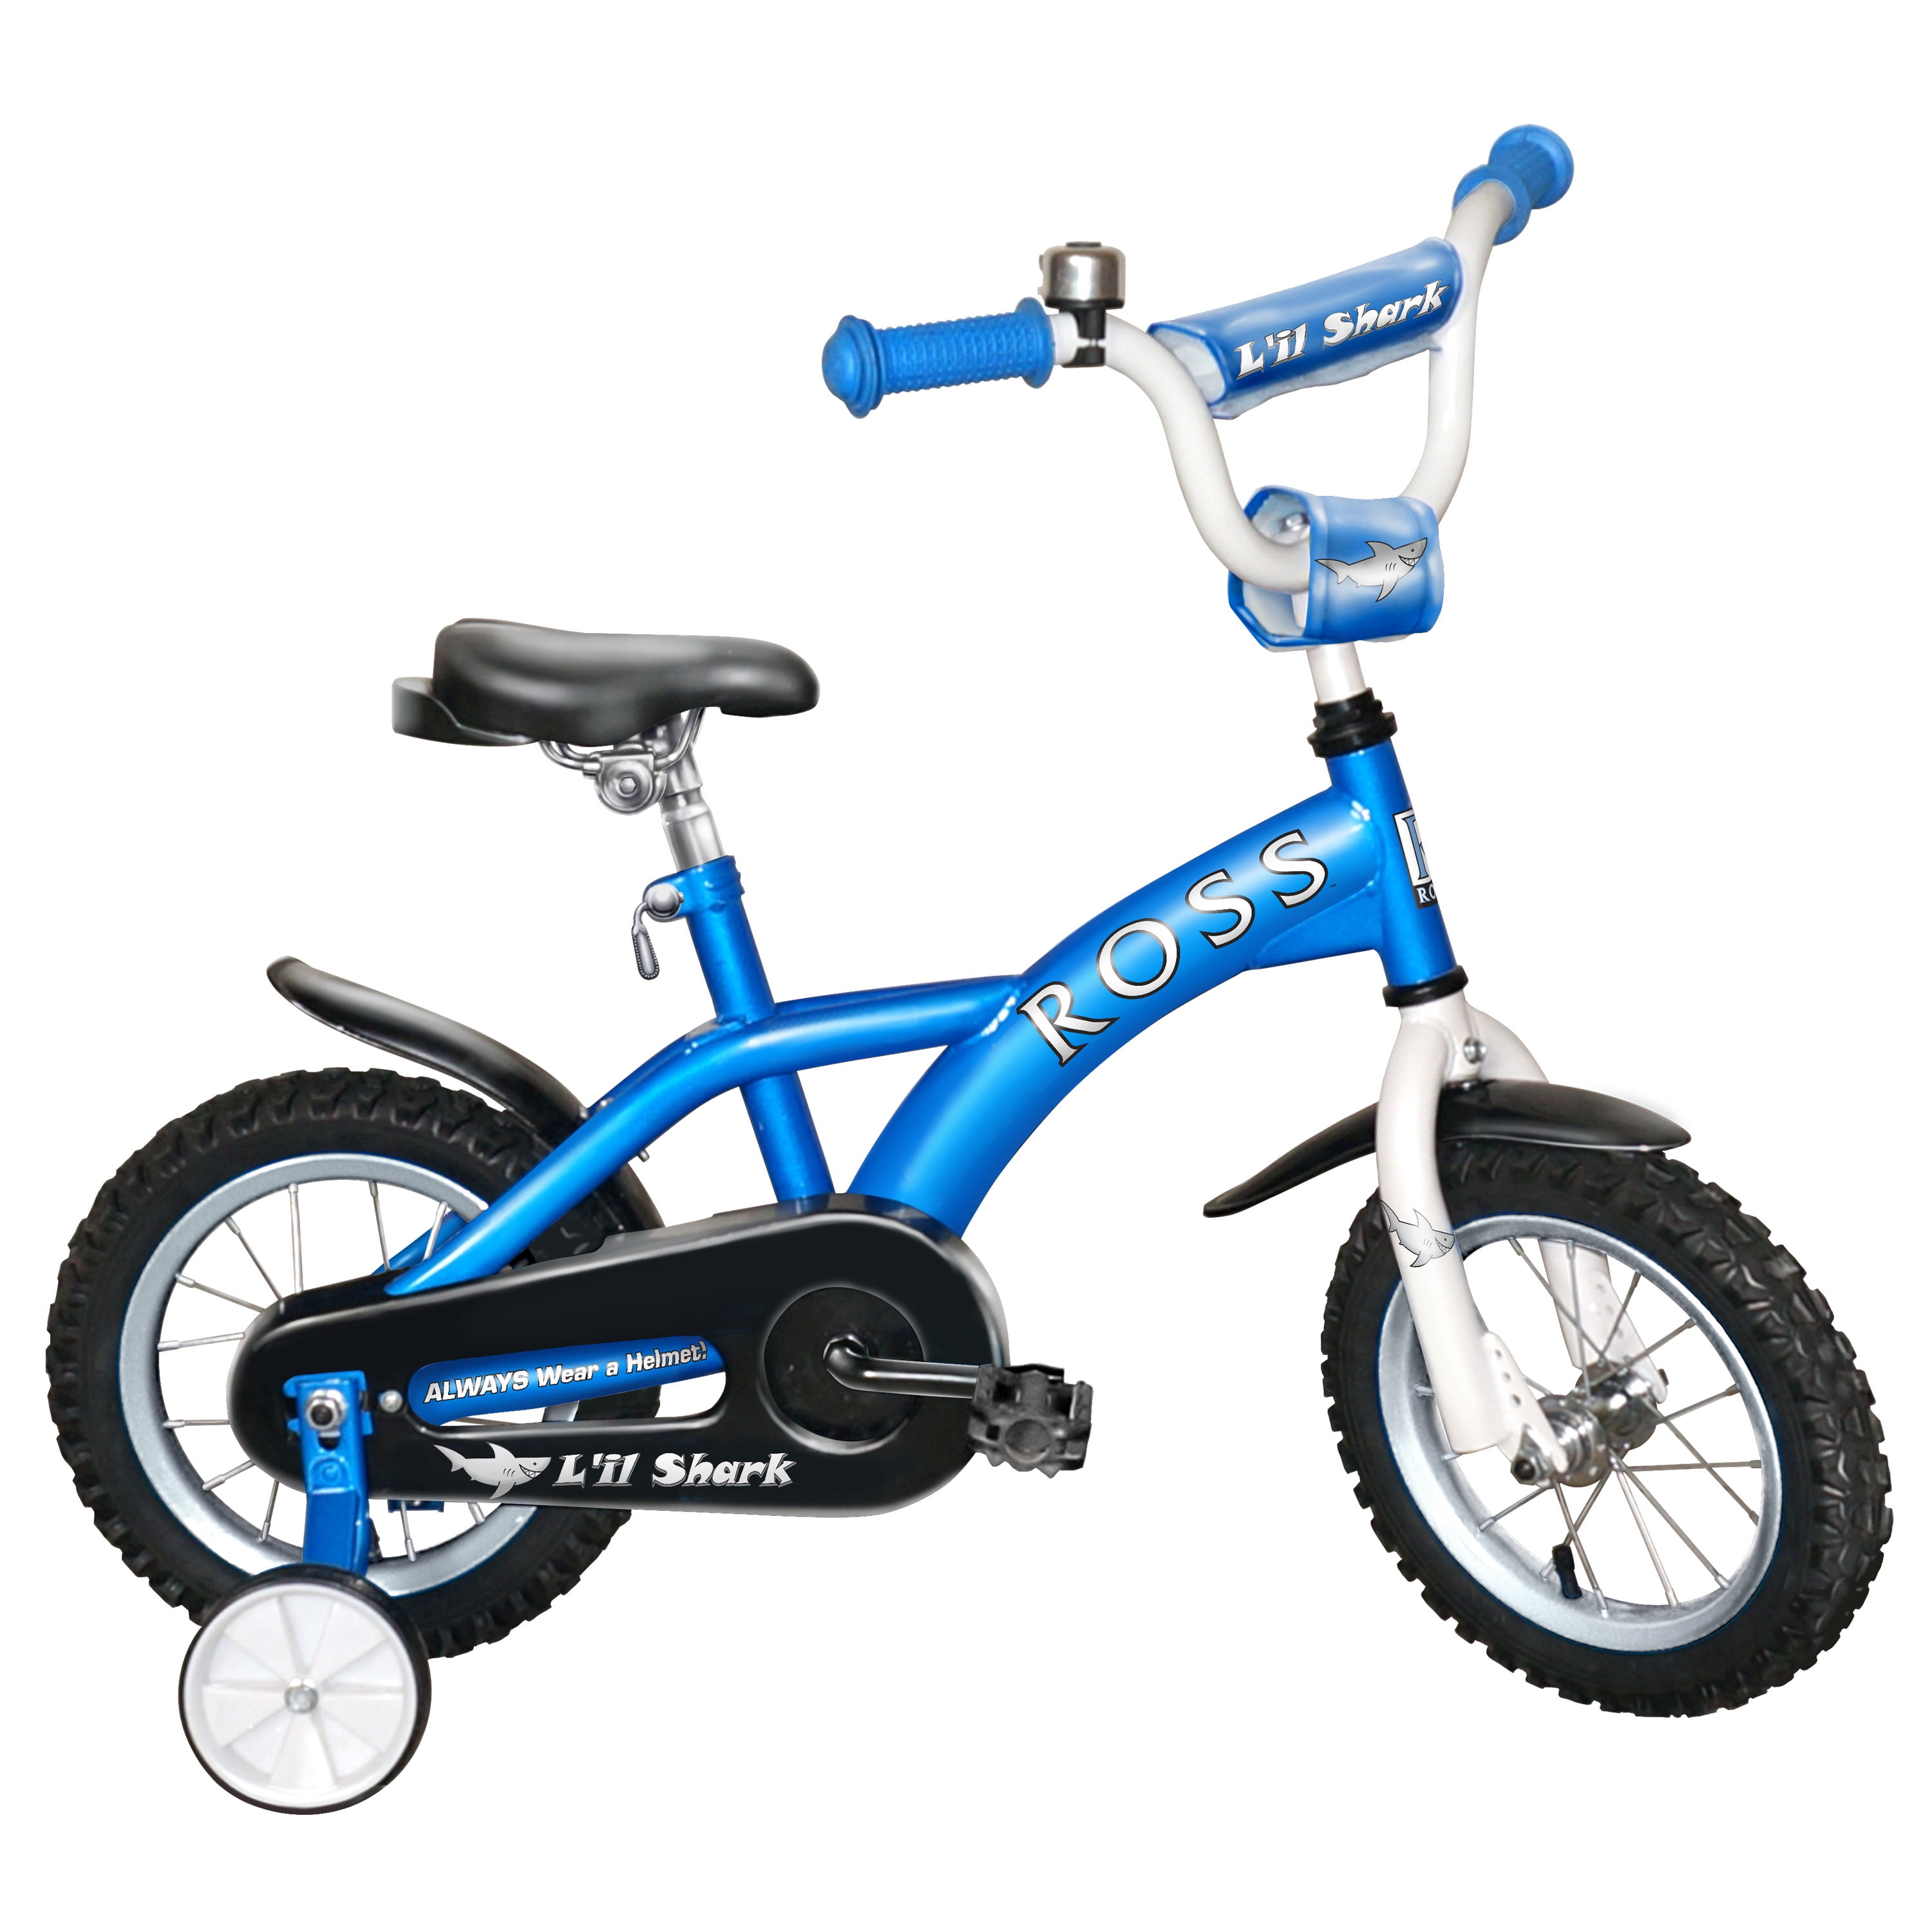 Ross Bicycles - 12 Inch Lil Shark Boys Bicycle With Removable Training Wheels -